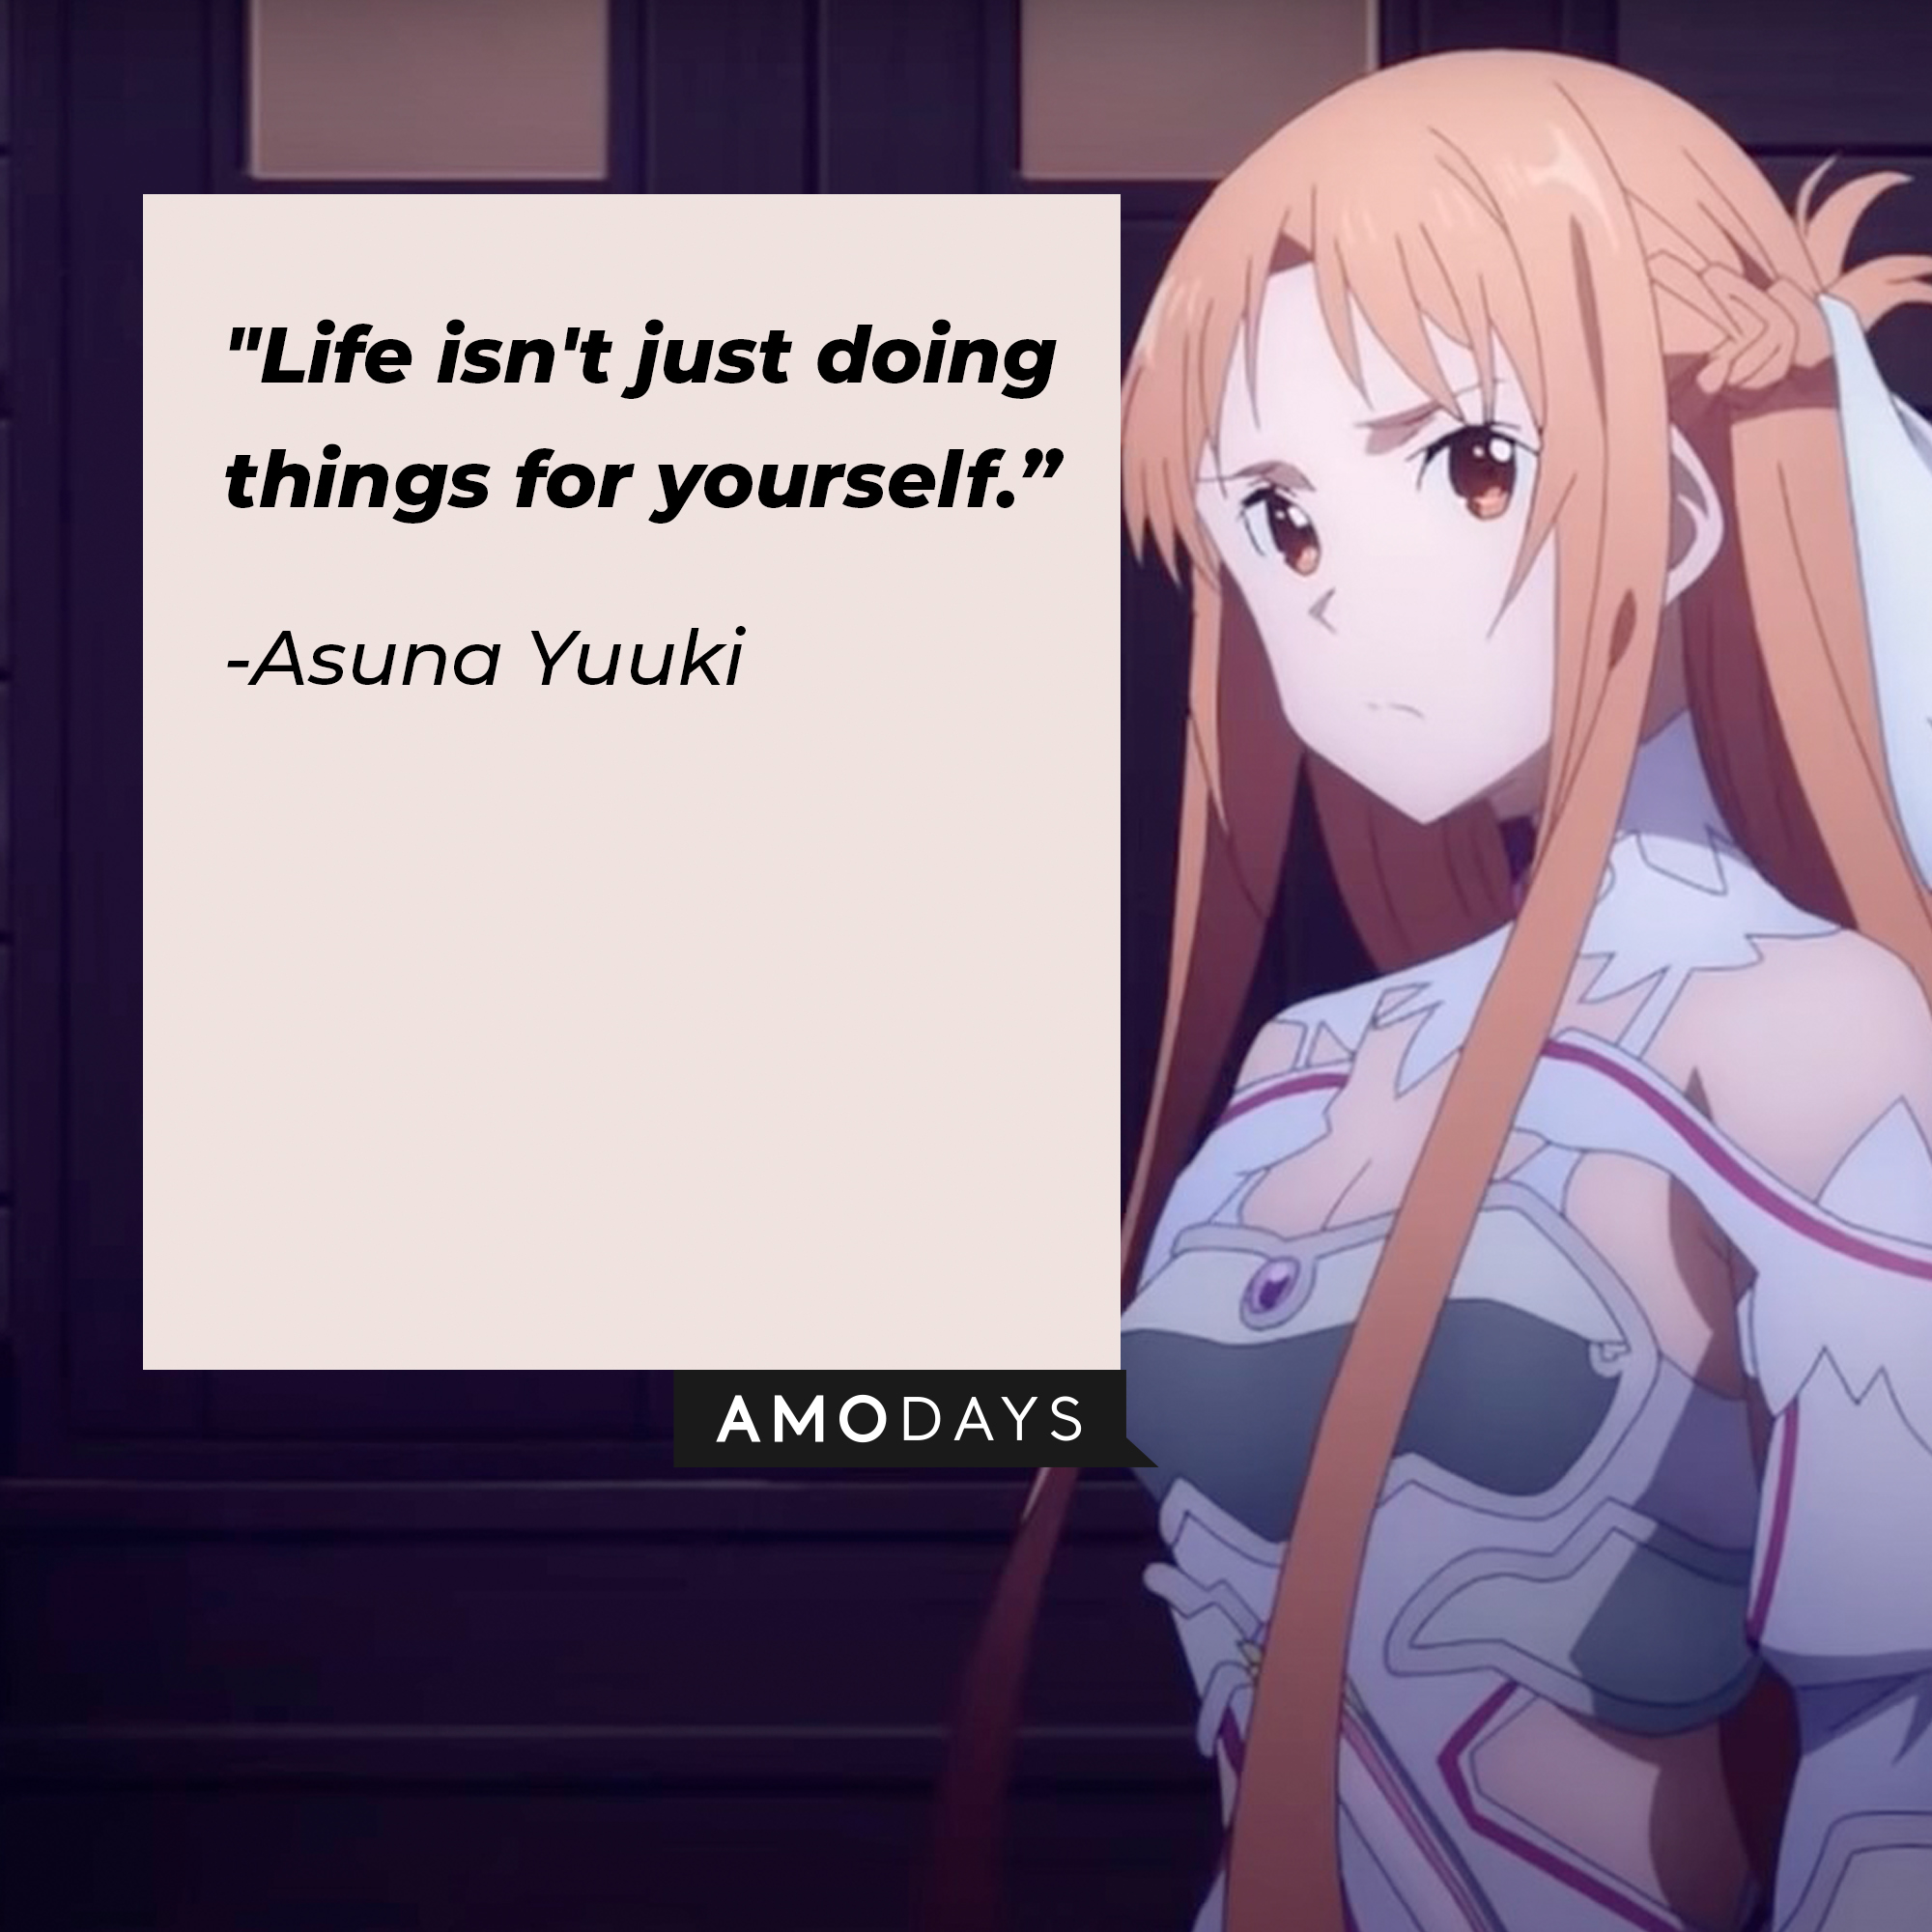 A picture of Asuna Yuuki with her quote: "Life isn't just doing things for yourself.” | Source: facebook.com/SwordArtOnlineUSA